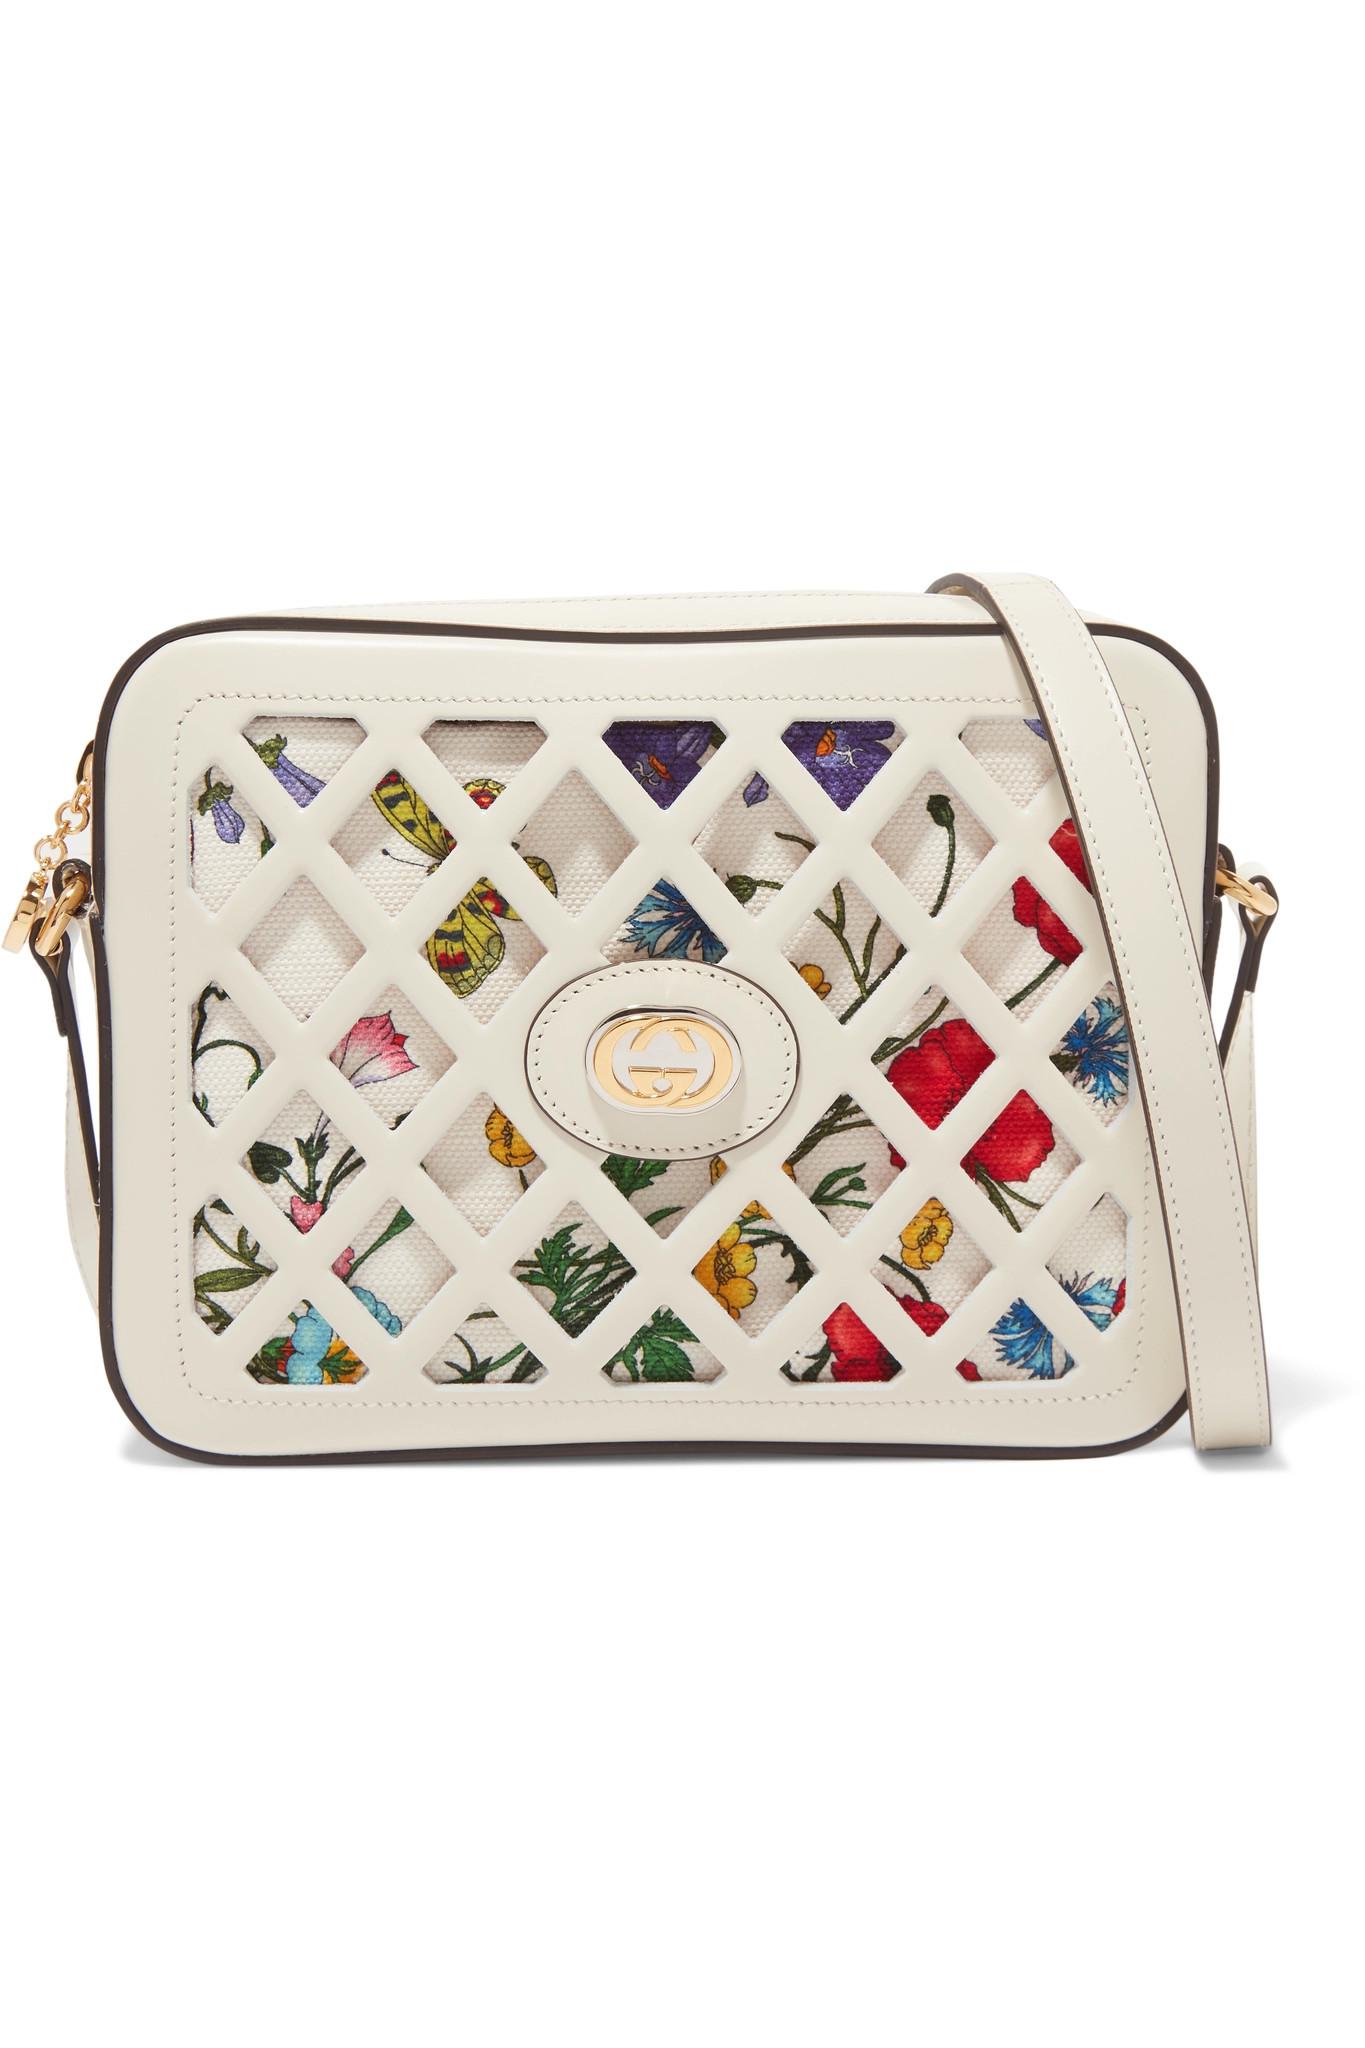 Gucci Canvas Perforated Crossbody Bag in White - Lyst